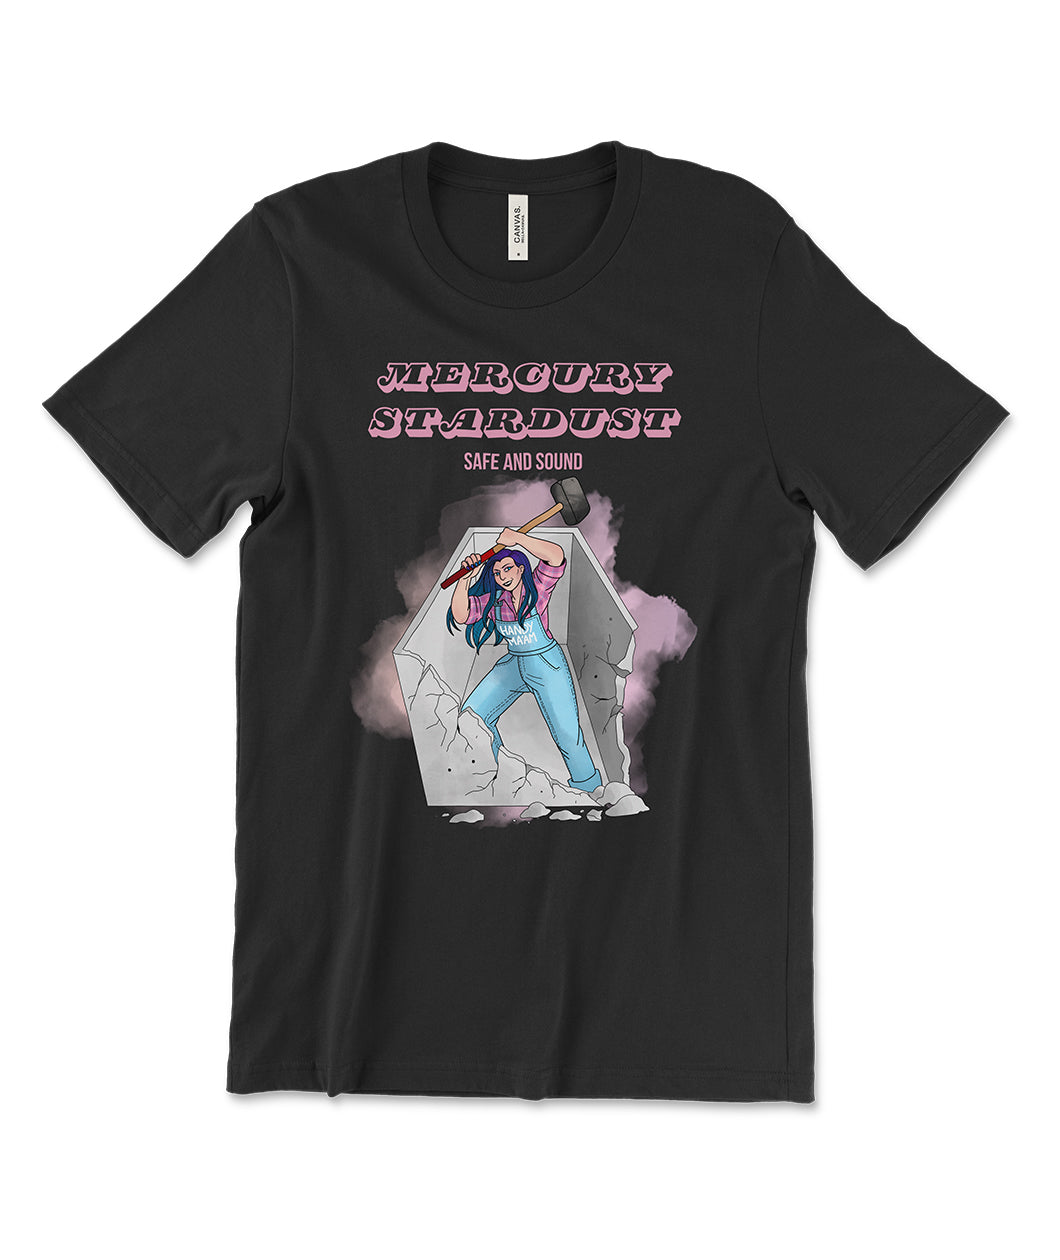 A black t-shirt that says "Mercury Stardust; Safe and Sound" in pink block letters. There is an illustration of someone with long blue hair and overalls holding a sledge hammer and breaking a concrete wall.